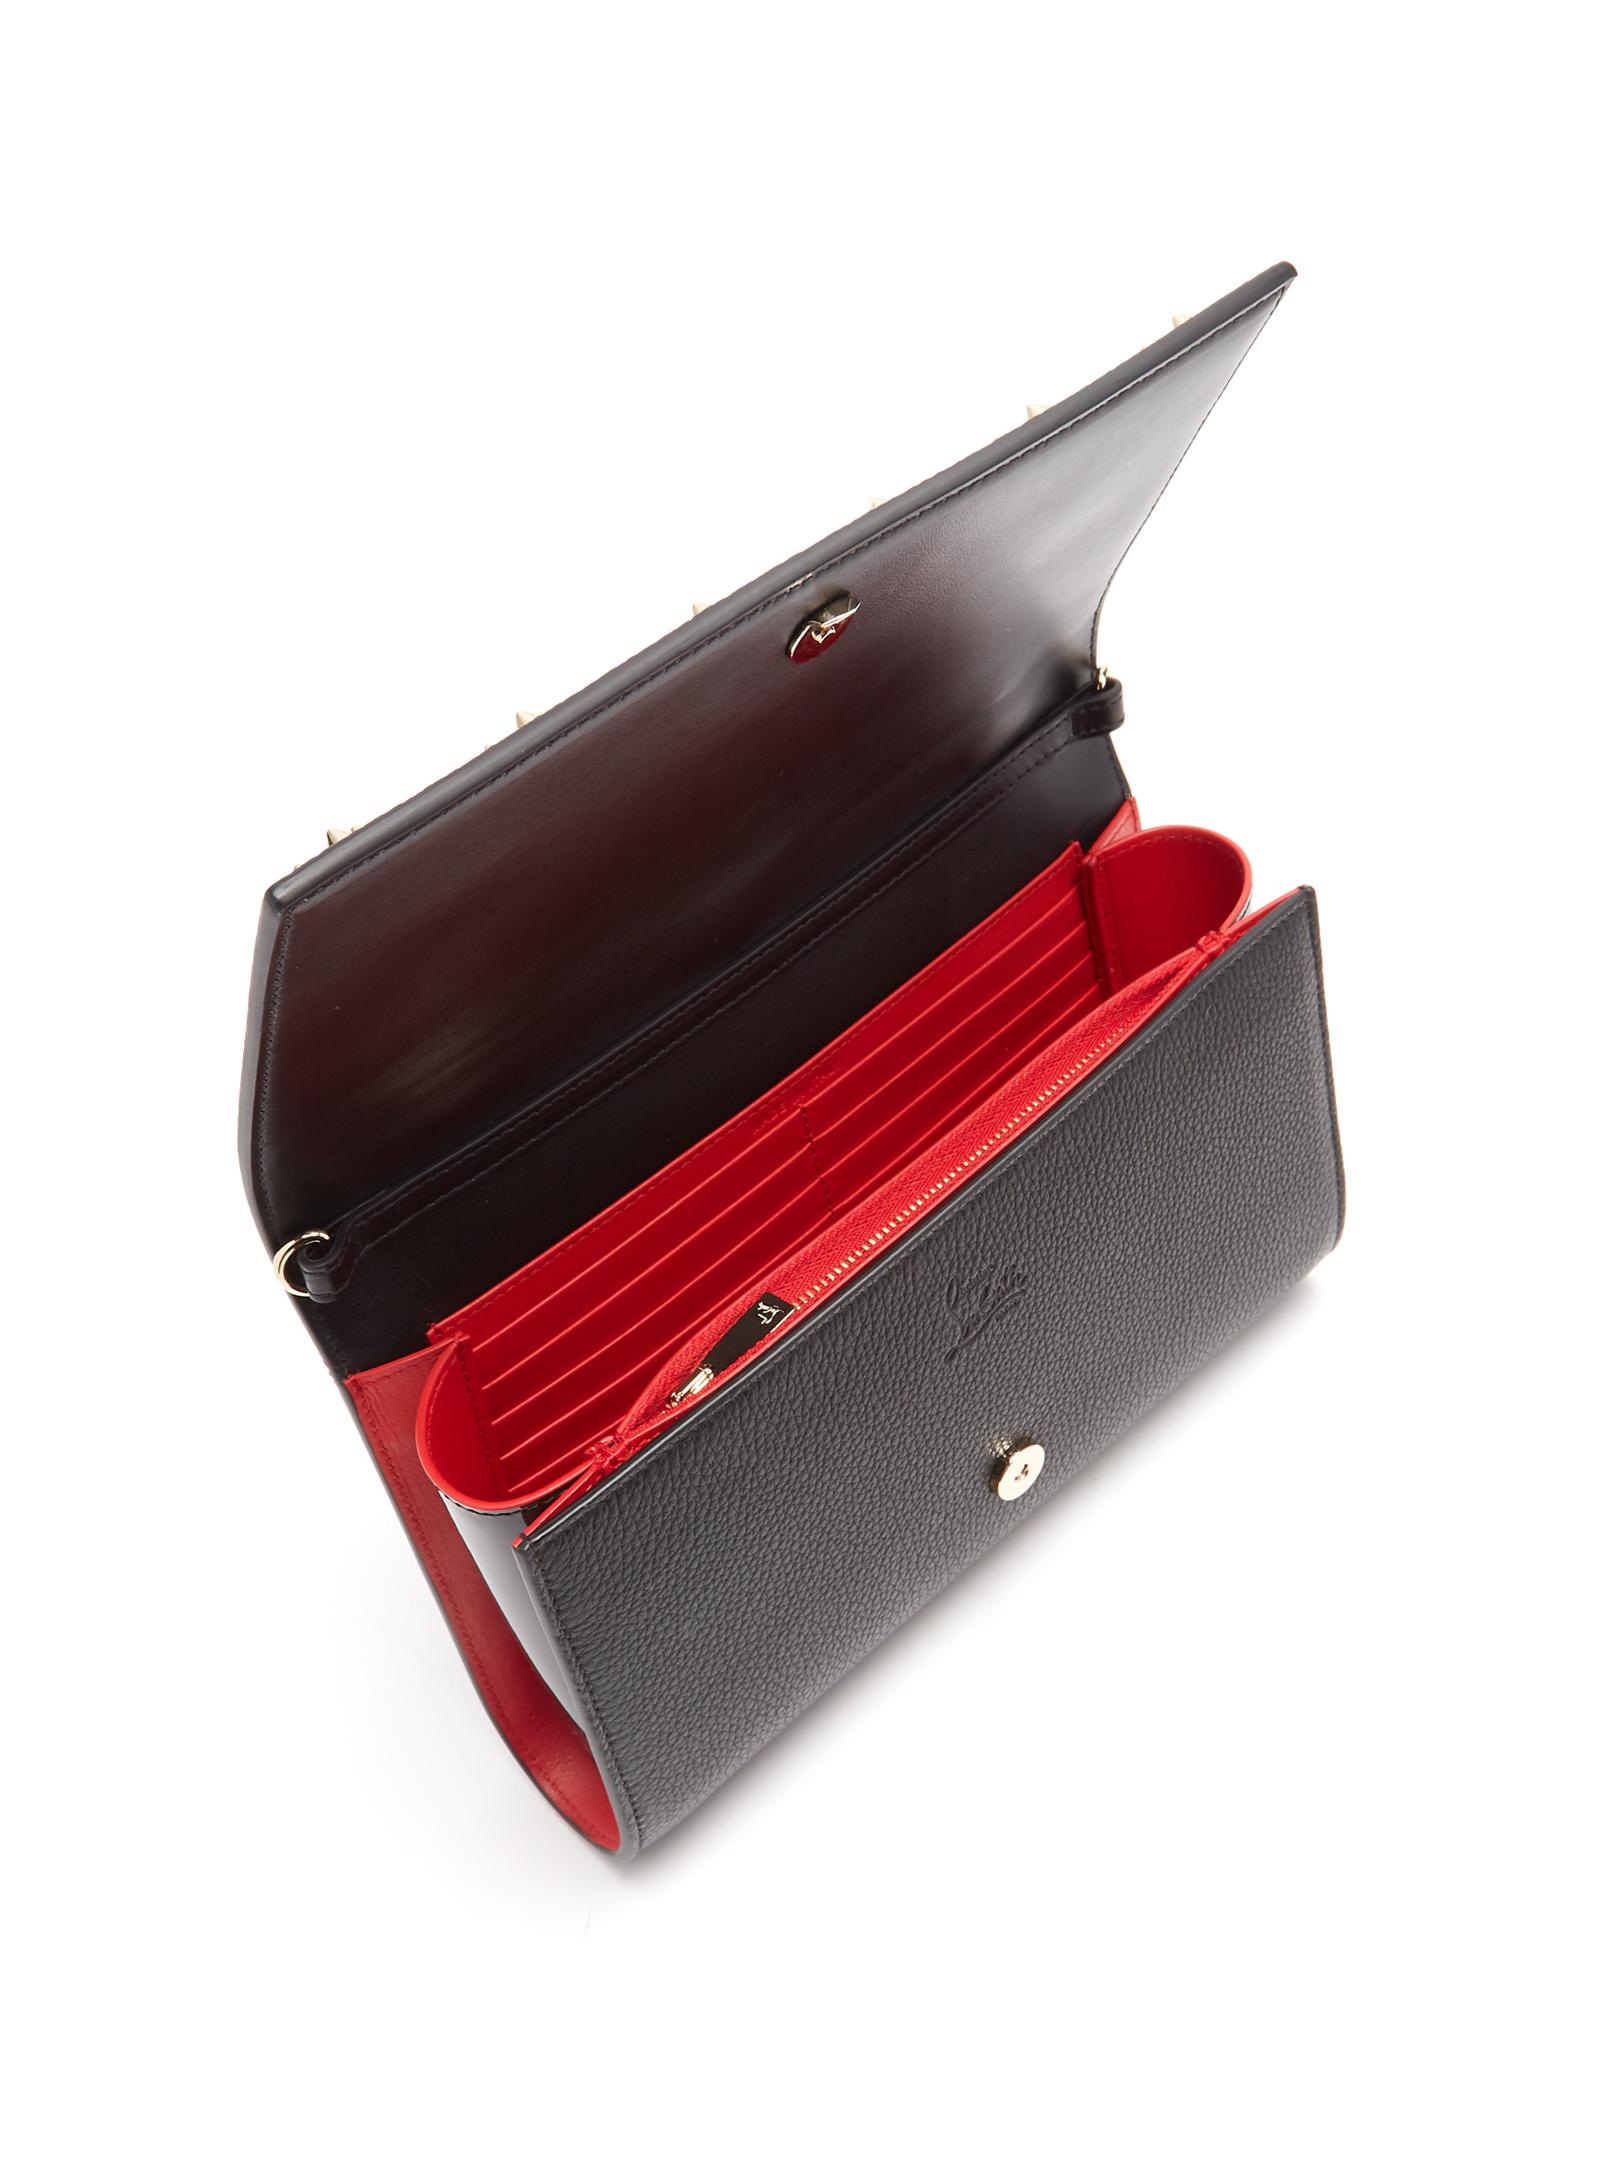 Christian Louboutin Paloma Embellished Leather Clutch in Black | Lyst